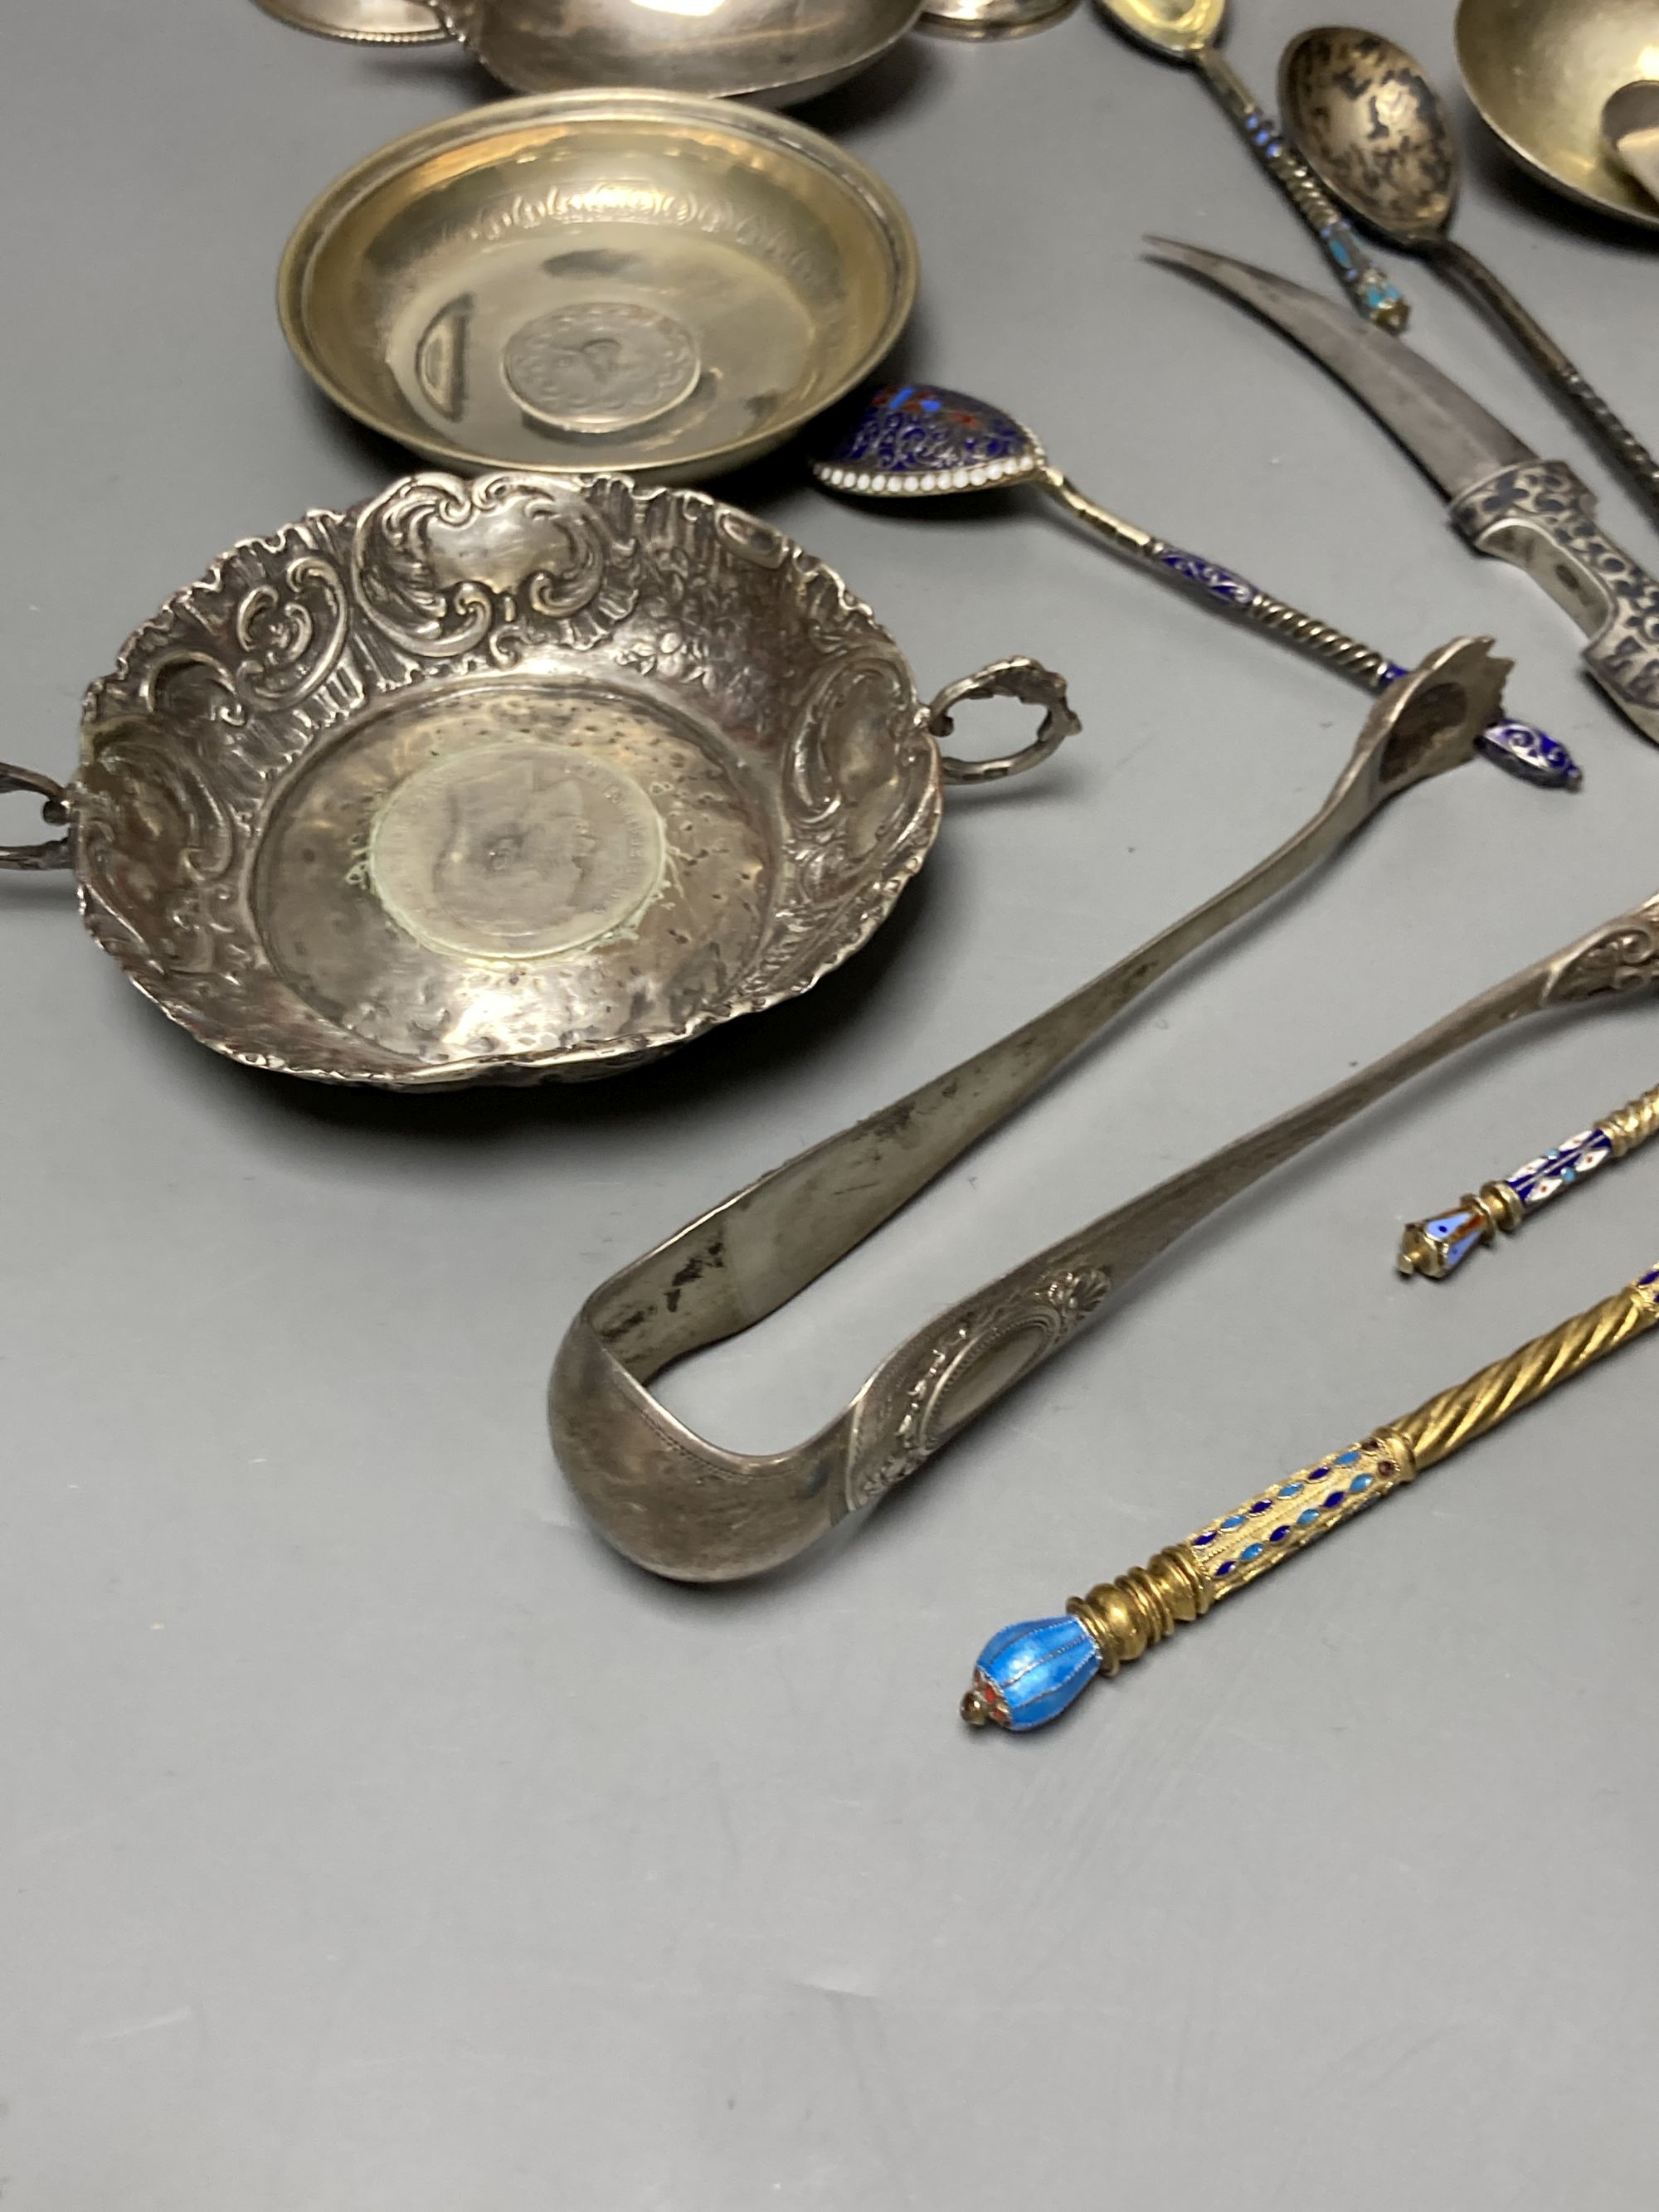 A small quantity of Russian style metal items including spoons (some with enamel) dishes, bowl etc.